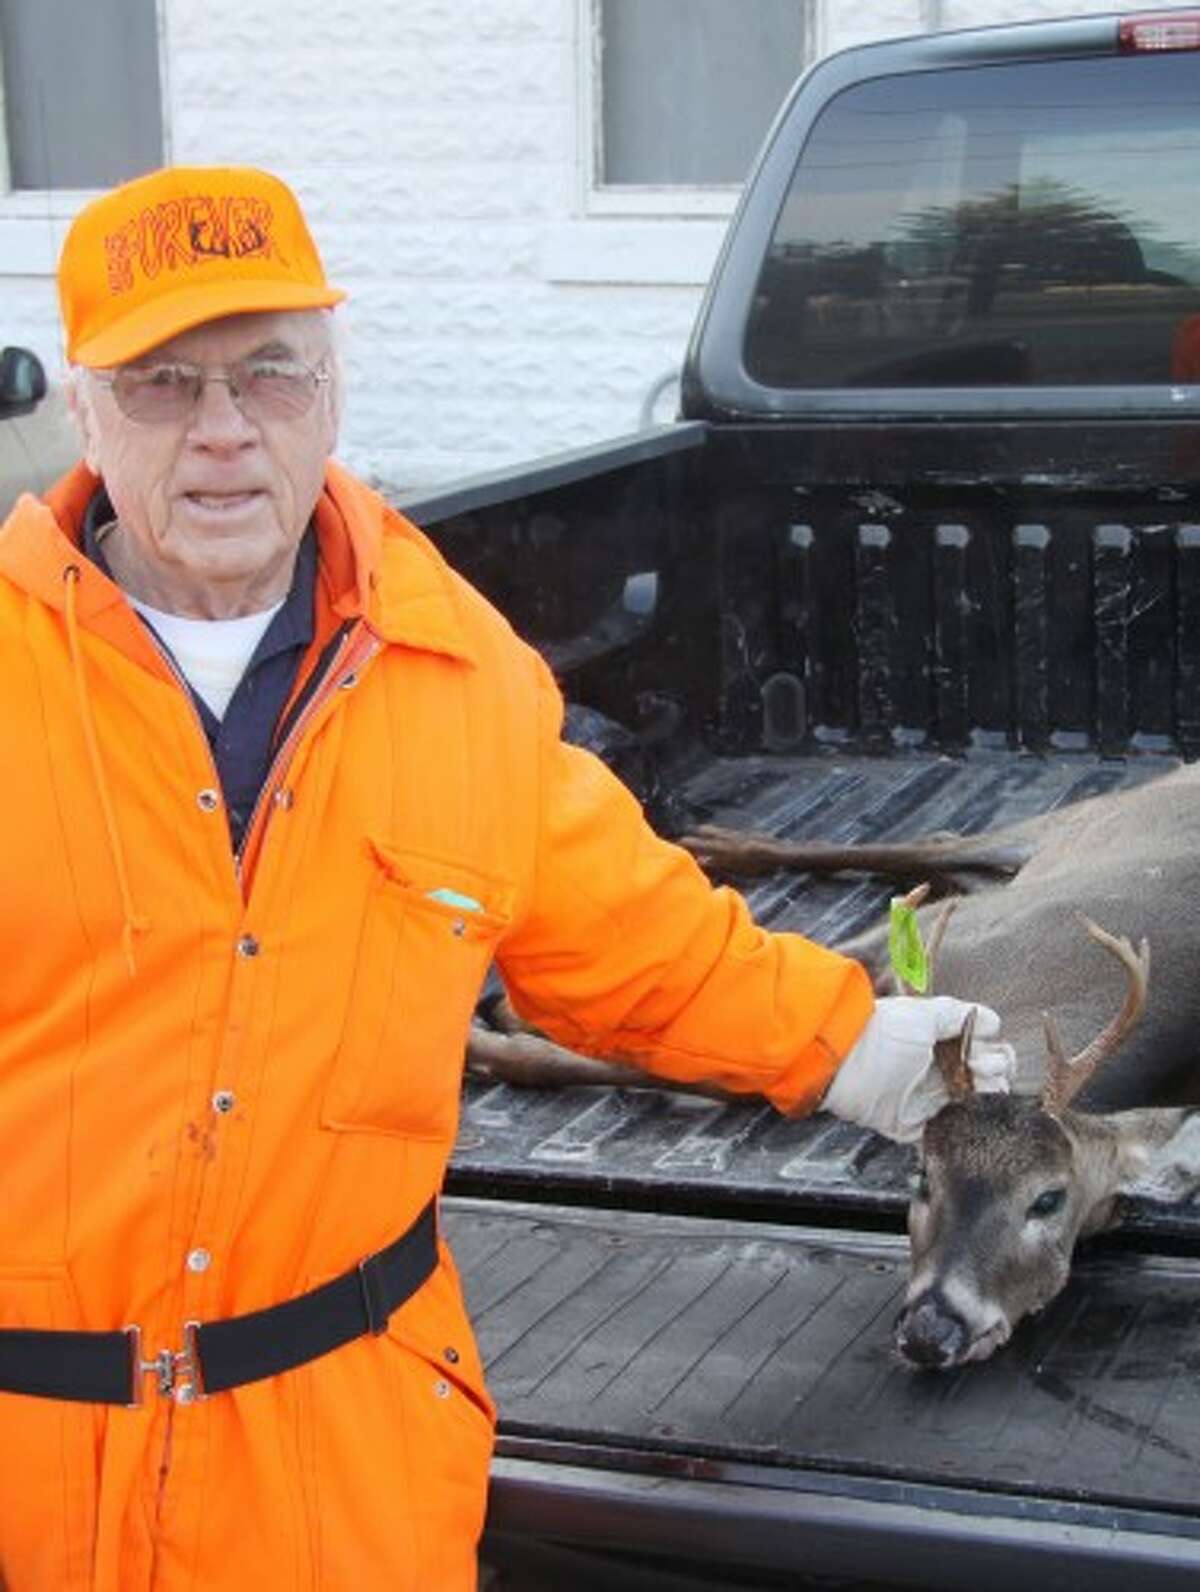 1) First Buck In honors go to John Emerich who logged not only the First Buck bragging rights, but also marked up a fine 14 1/4 total points with his whitetail that had 6 points and an 8 1/4 inch spread.